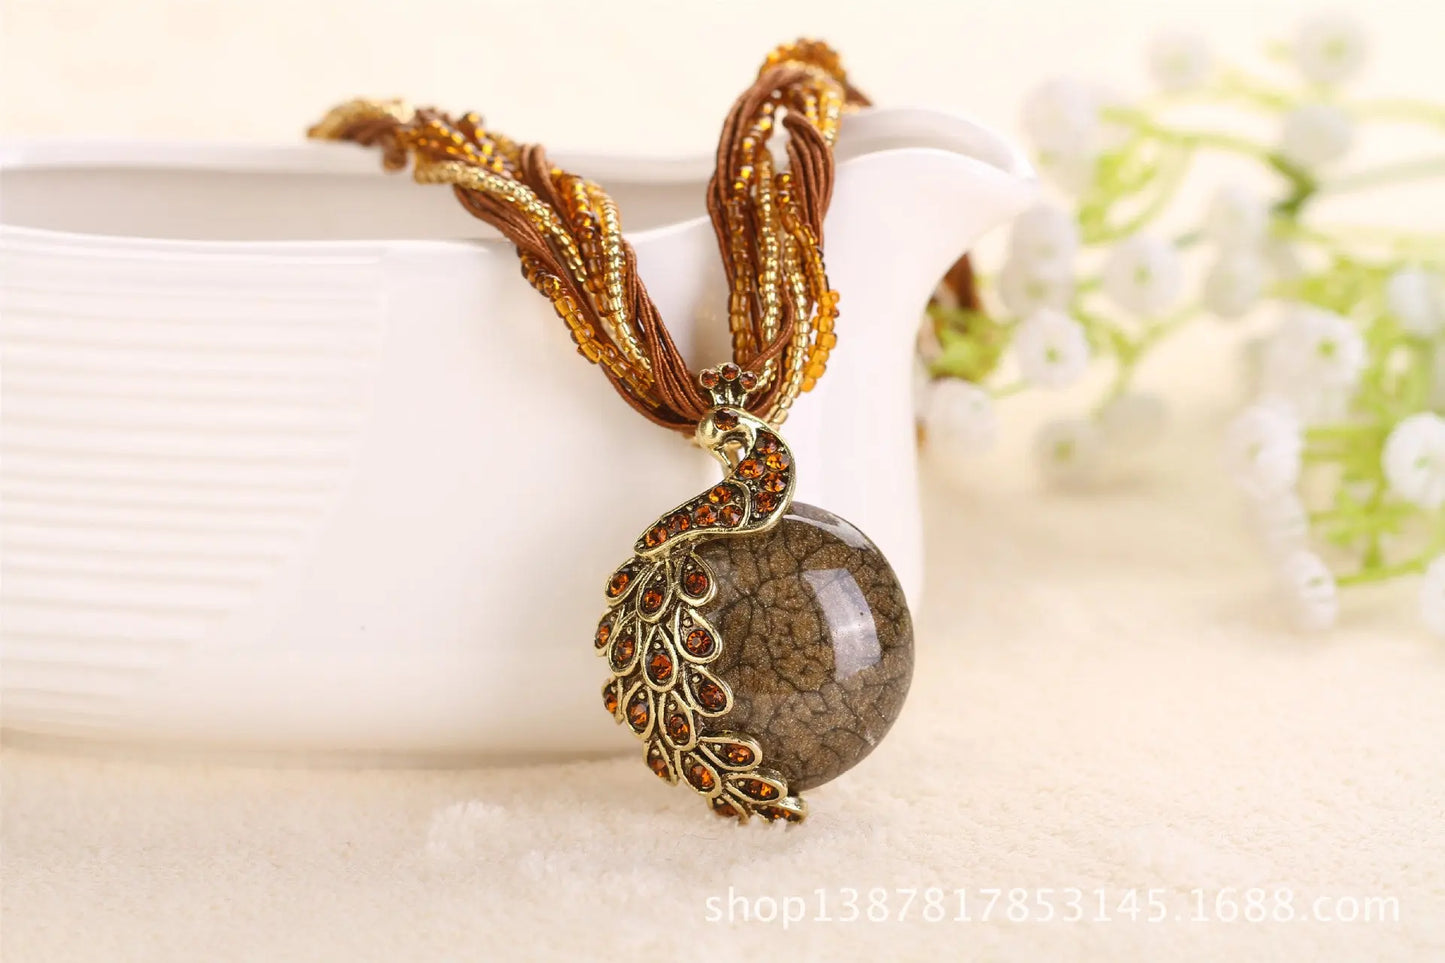 Boho Ethnic Jewelry Choker Handmade Pendant Necklace Natural Stone Bead Peacock Statement Maxi Necklace for Women Girls Gifts - Trending's Arena Beauty Boho Ethnic Jewelry Choker Handmade Pendant Necklace Natural Stone Bead Peacock Statement Maxi Necklace for Women Girls Gifts Electronics Facial & Neck brown